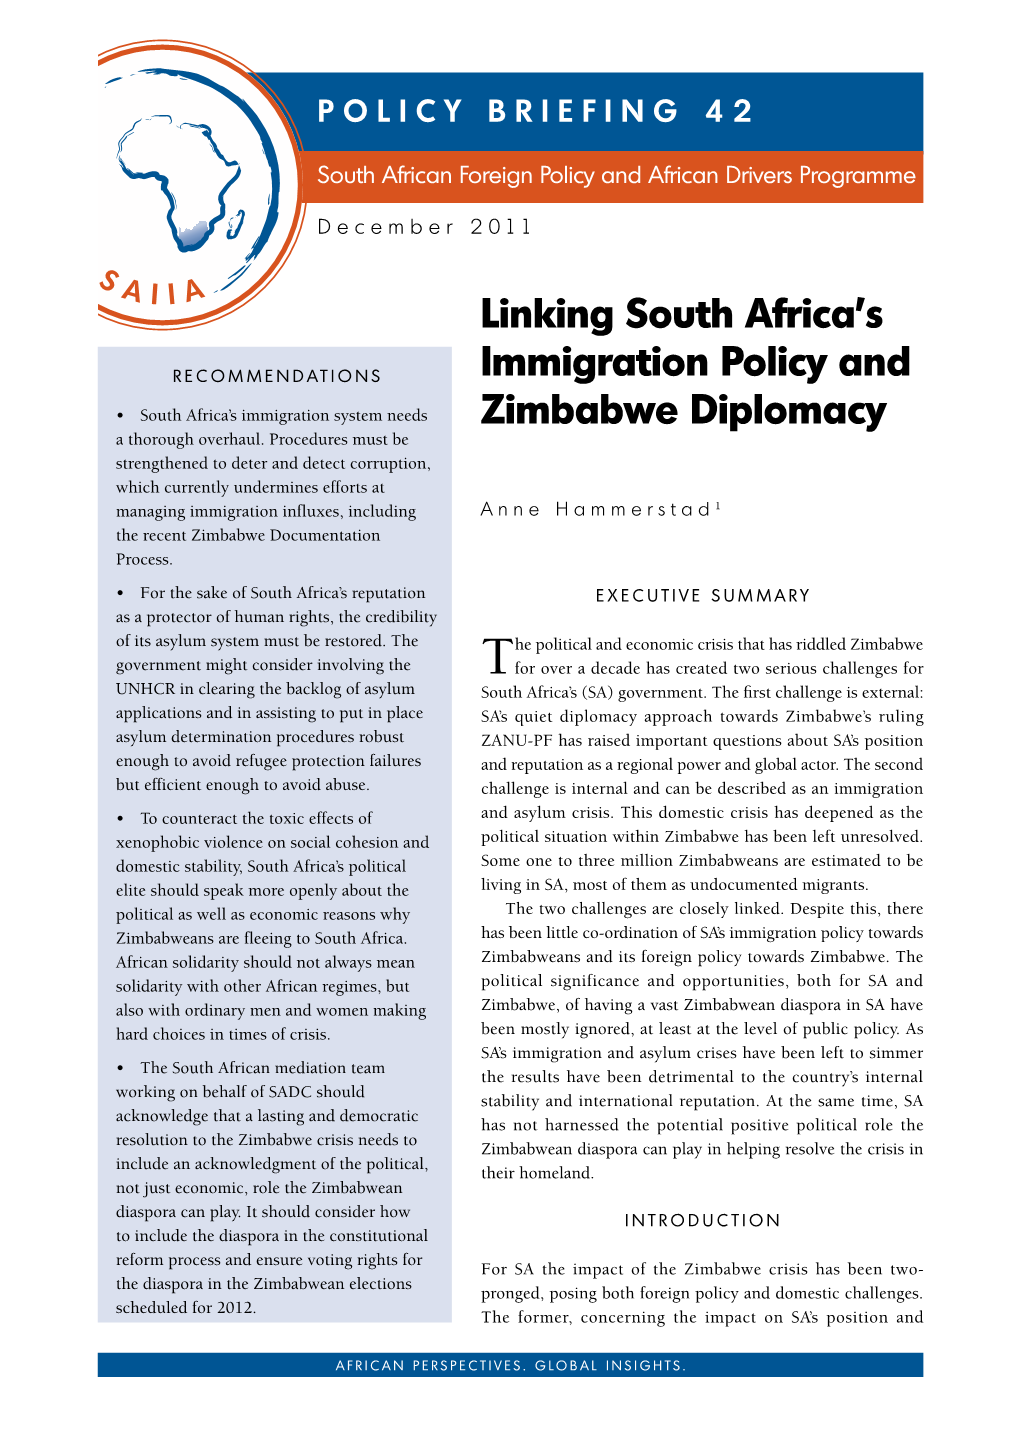 Linking South Africa's Immigration Policy and Zimbabwe Diplomacy